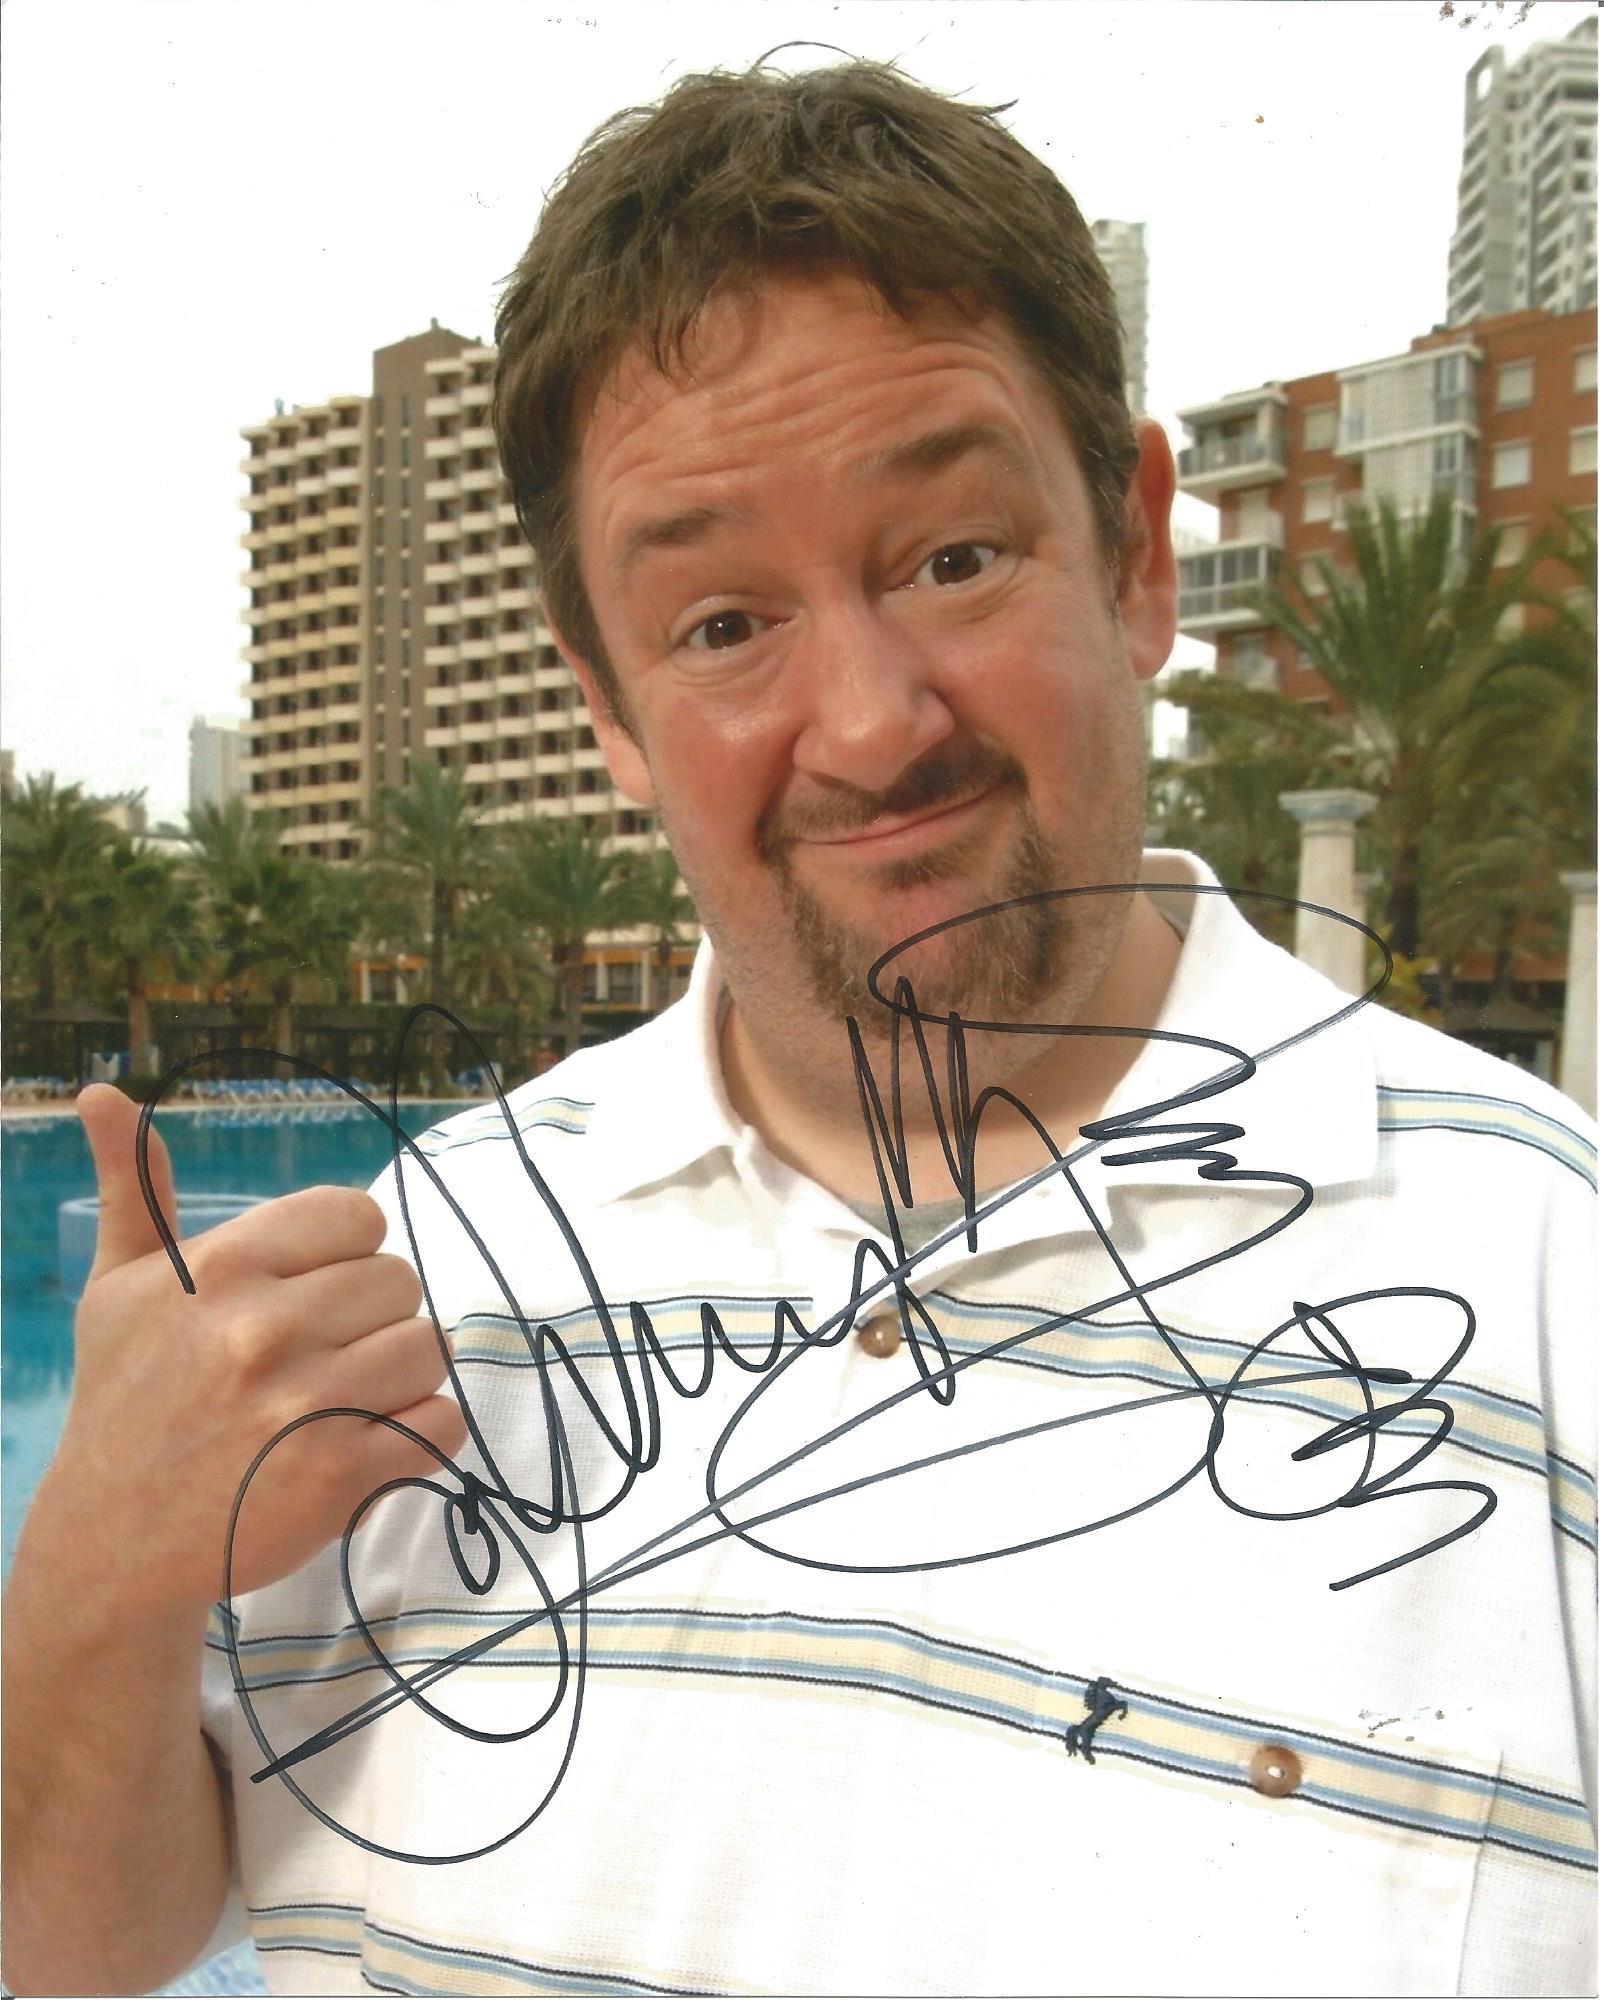 Johnny Vegas Comedy Actor Signed Benidorm 8x10 Photo. Good Condition. All signed pieces come with